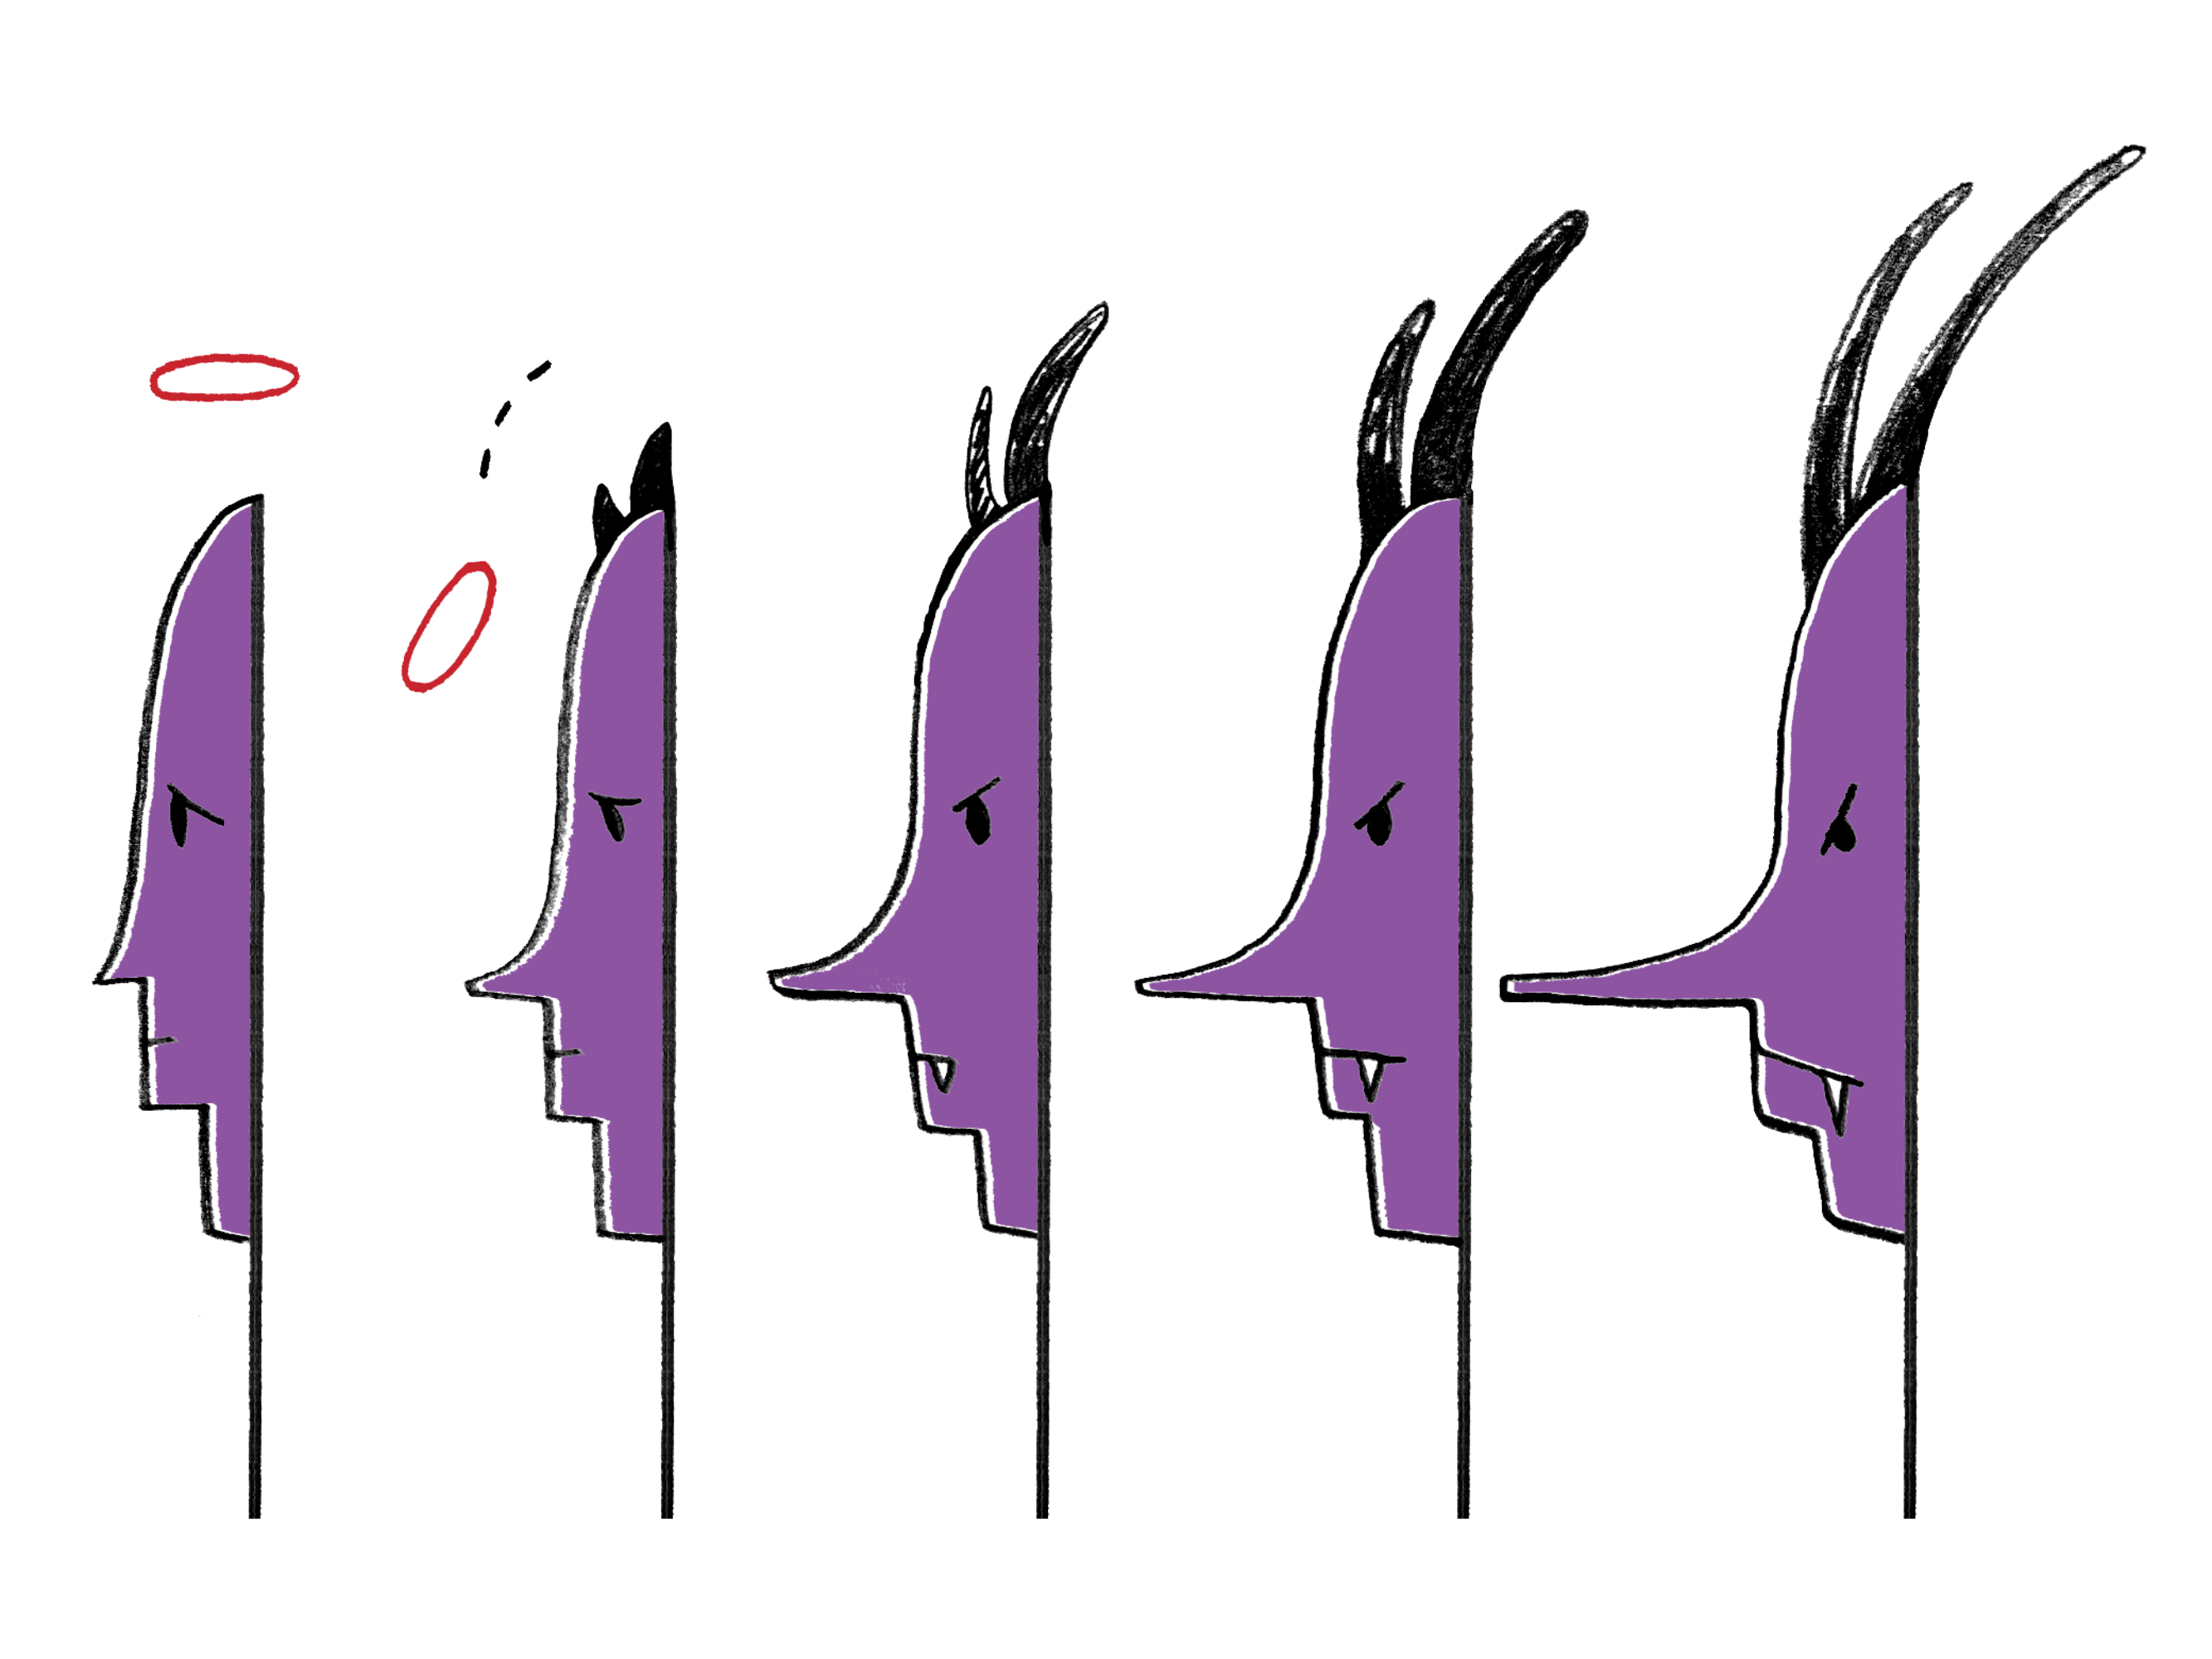 Five purple faces point to the left with varying degrees of nose pointy-ness.